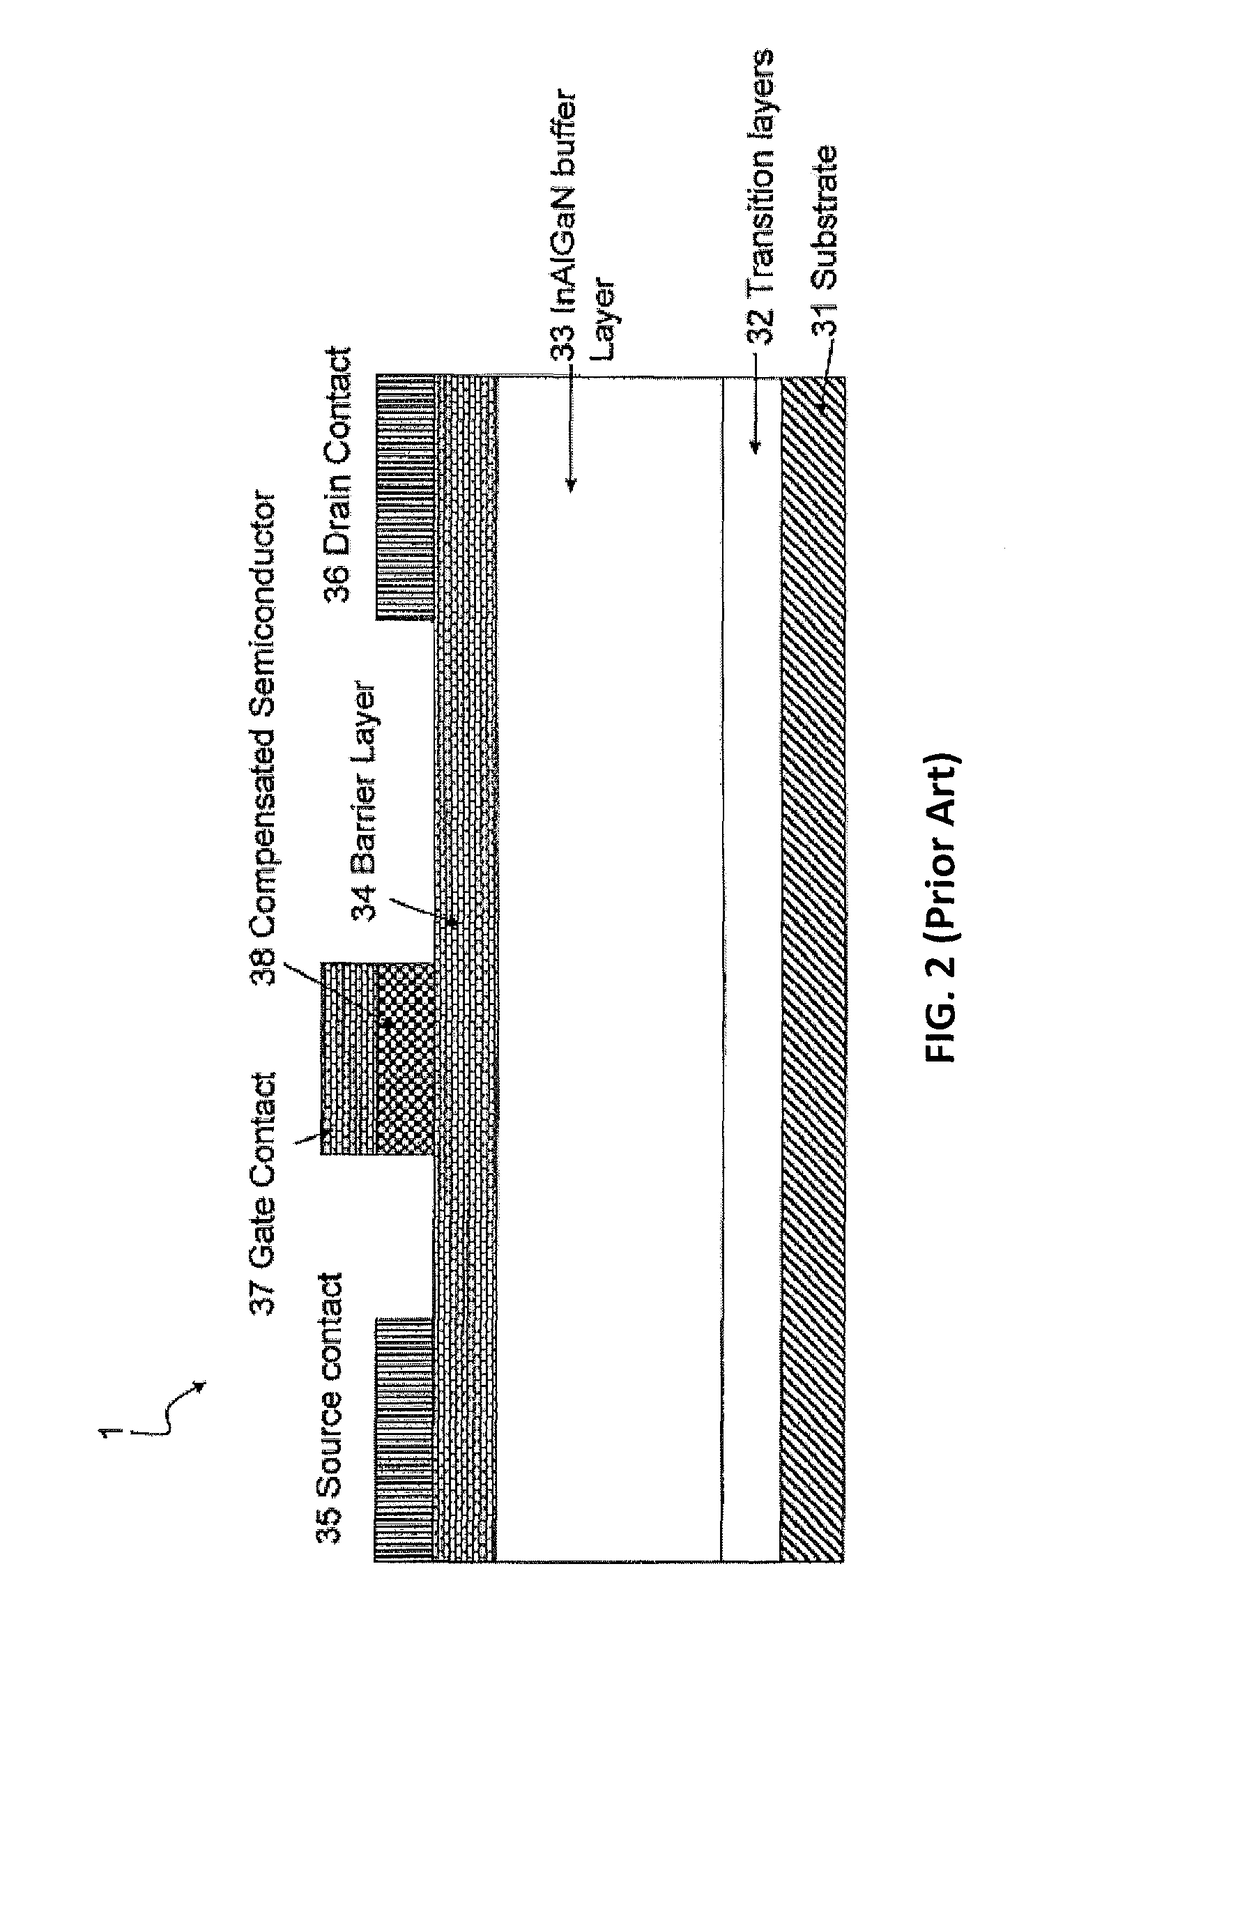 Multi-step surface passivation structures and methods for fabricating same